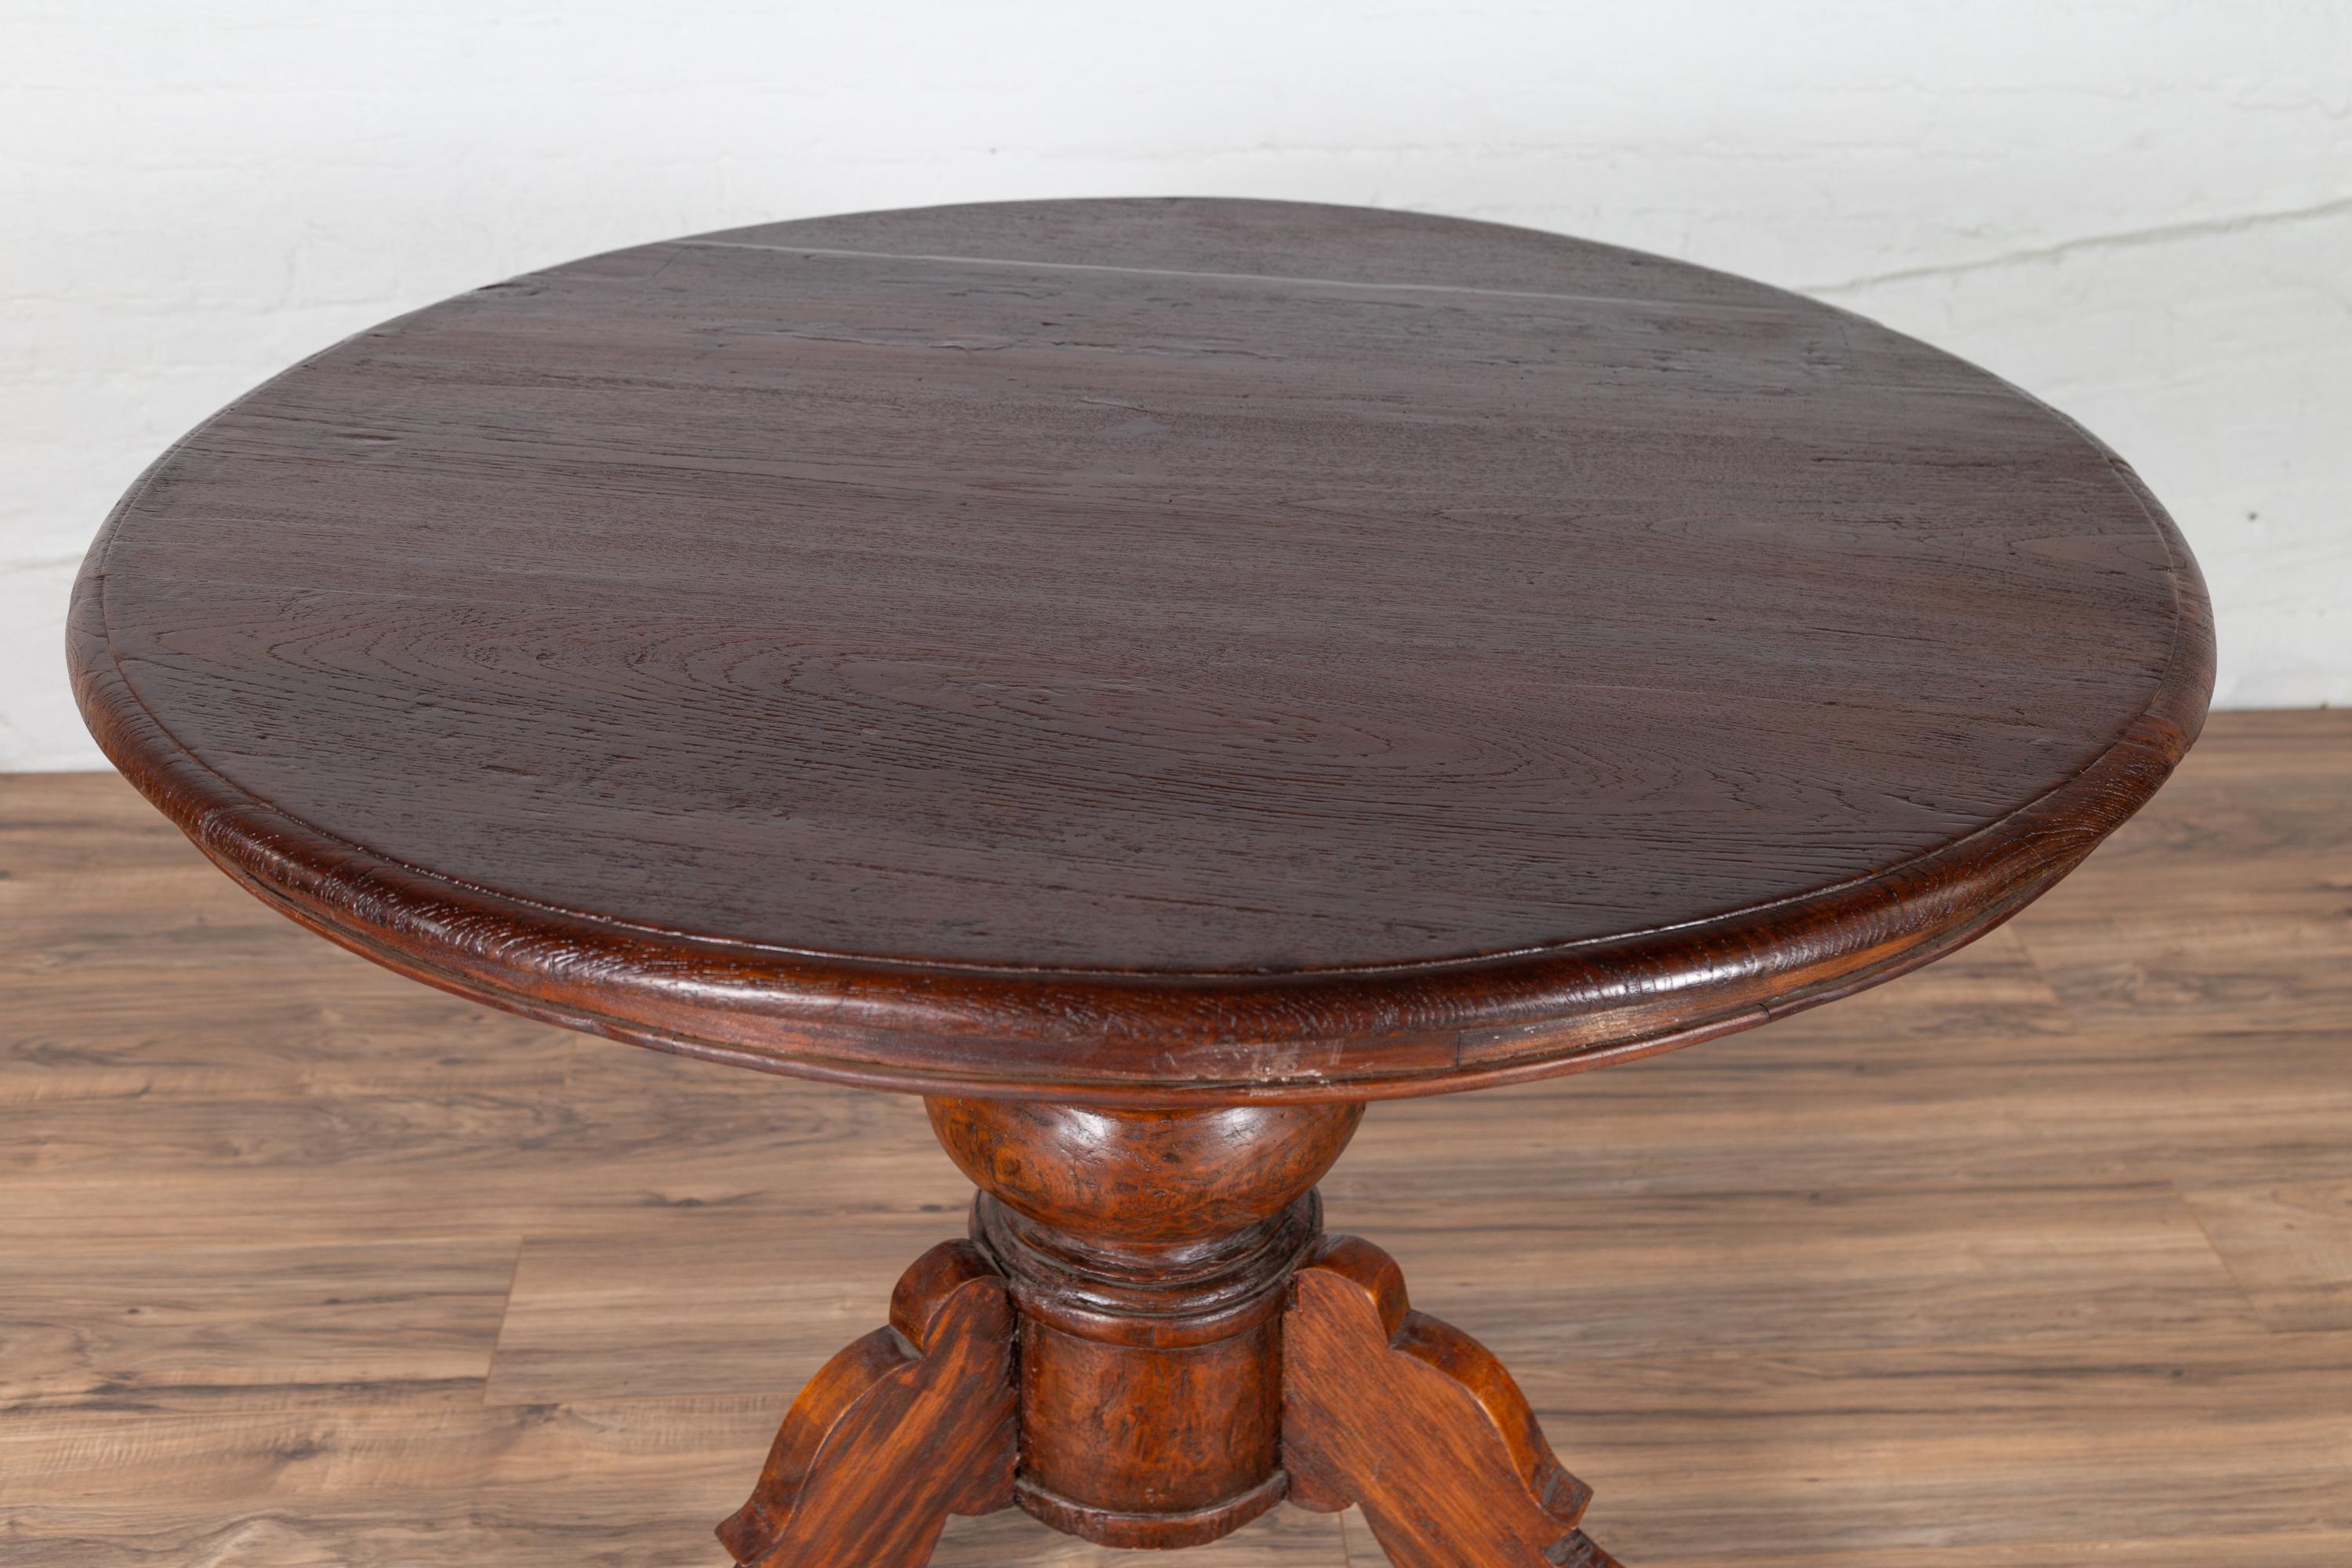 20th Century Dutch Colonial Javanese Pedestal Tripod Table with Circular Top and Turned Base